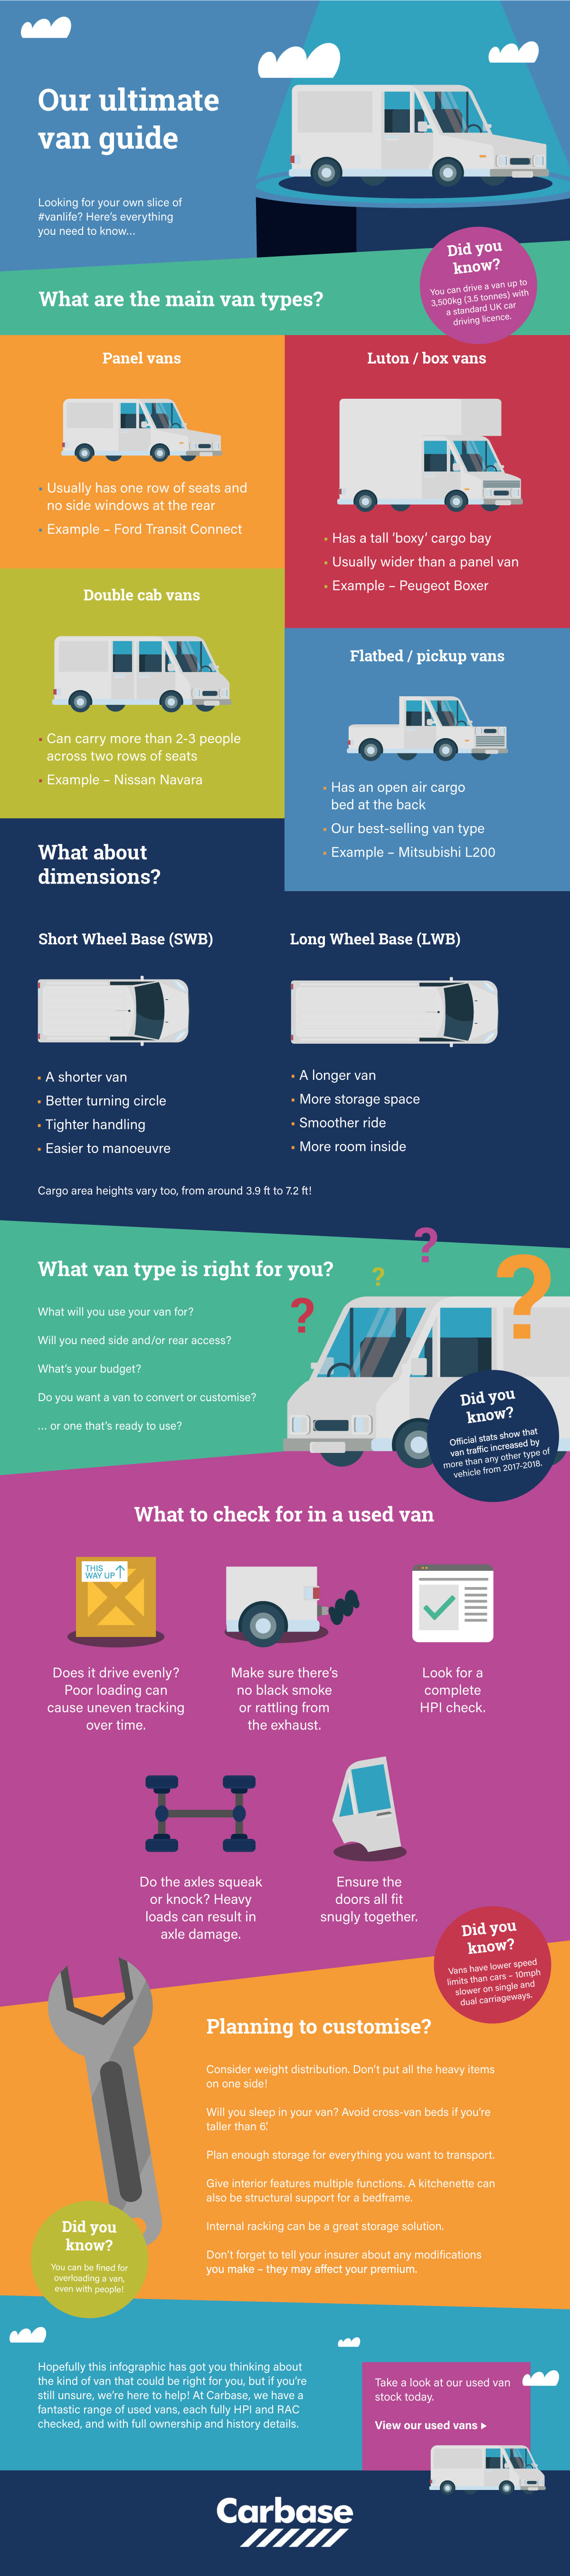 The ulimate van guide